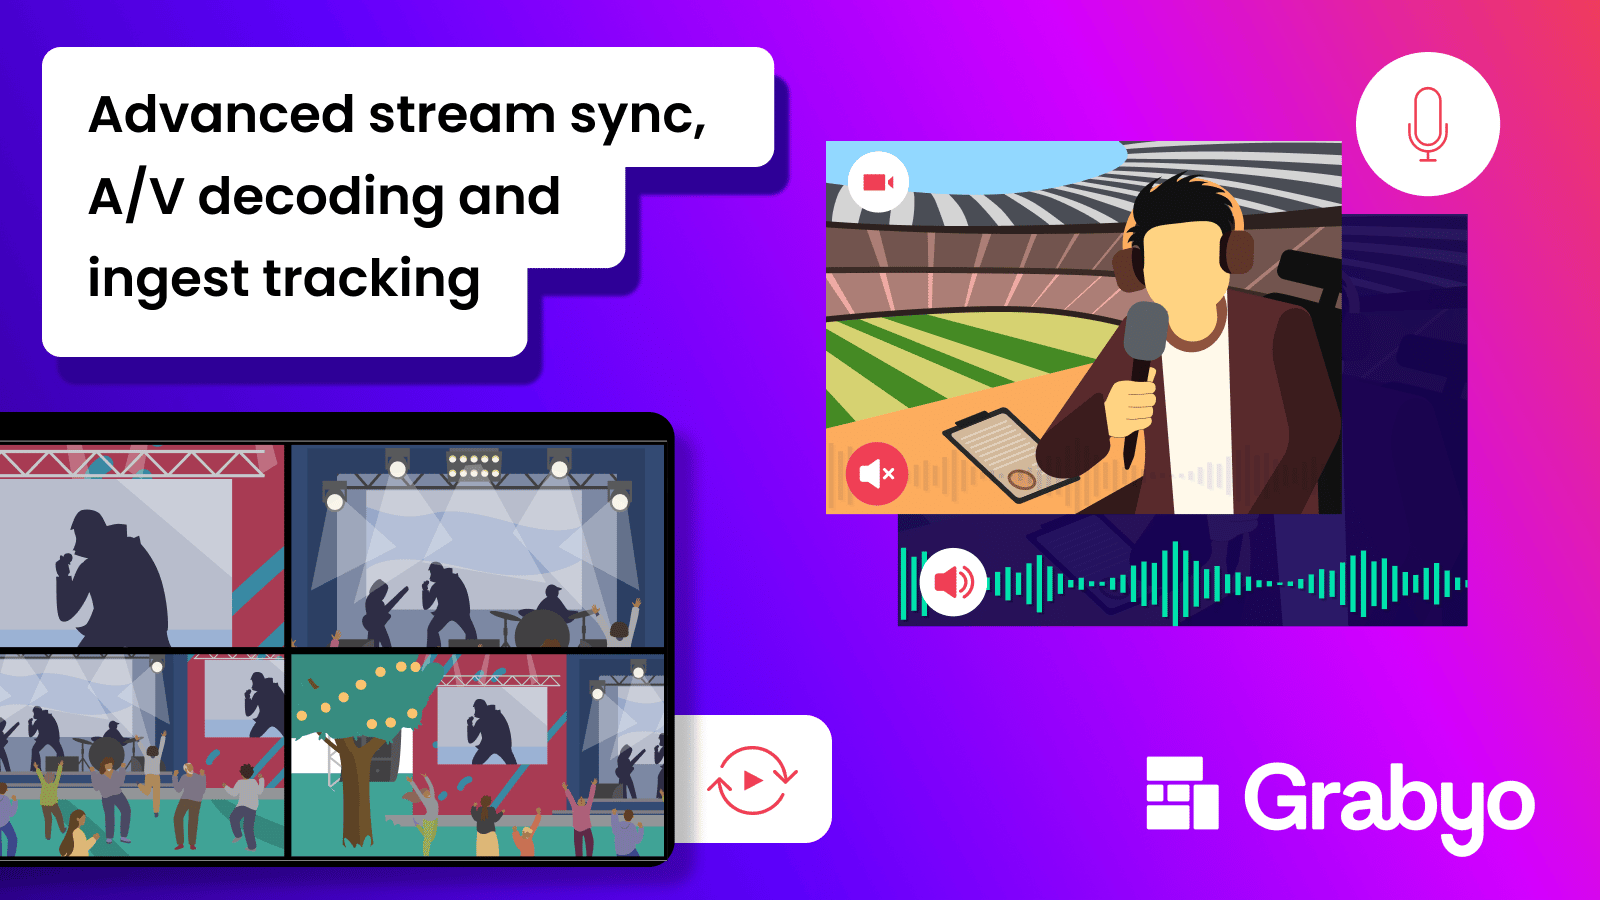 Advanced stream sync, A/V decoding and ingest metrics A bumper live production update from Grabyo